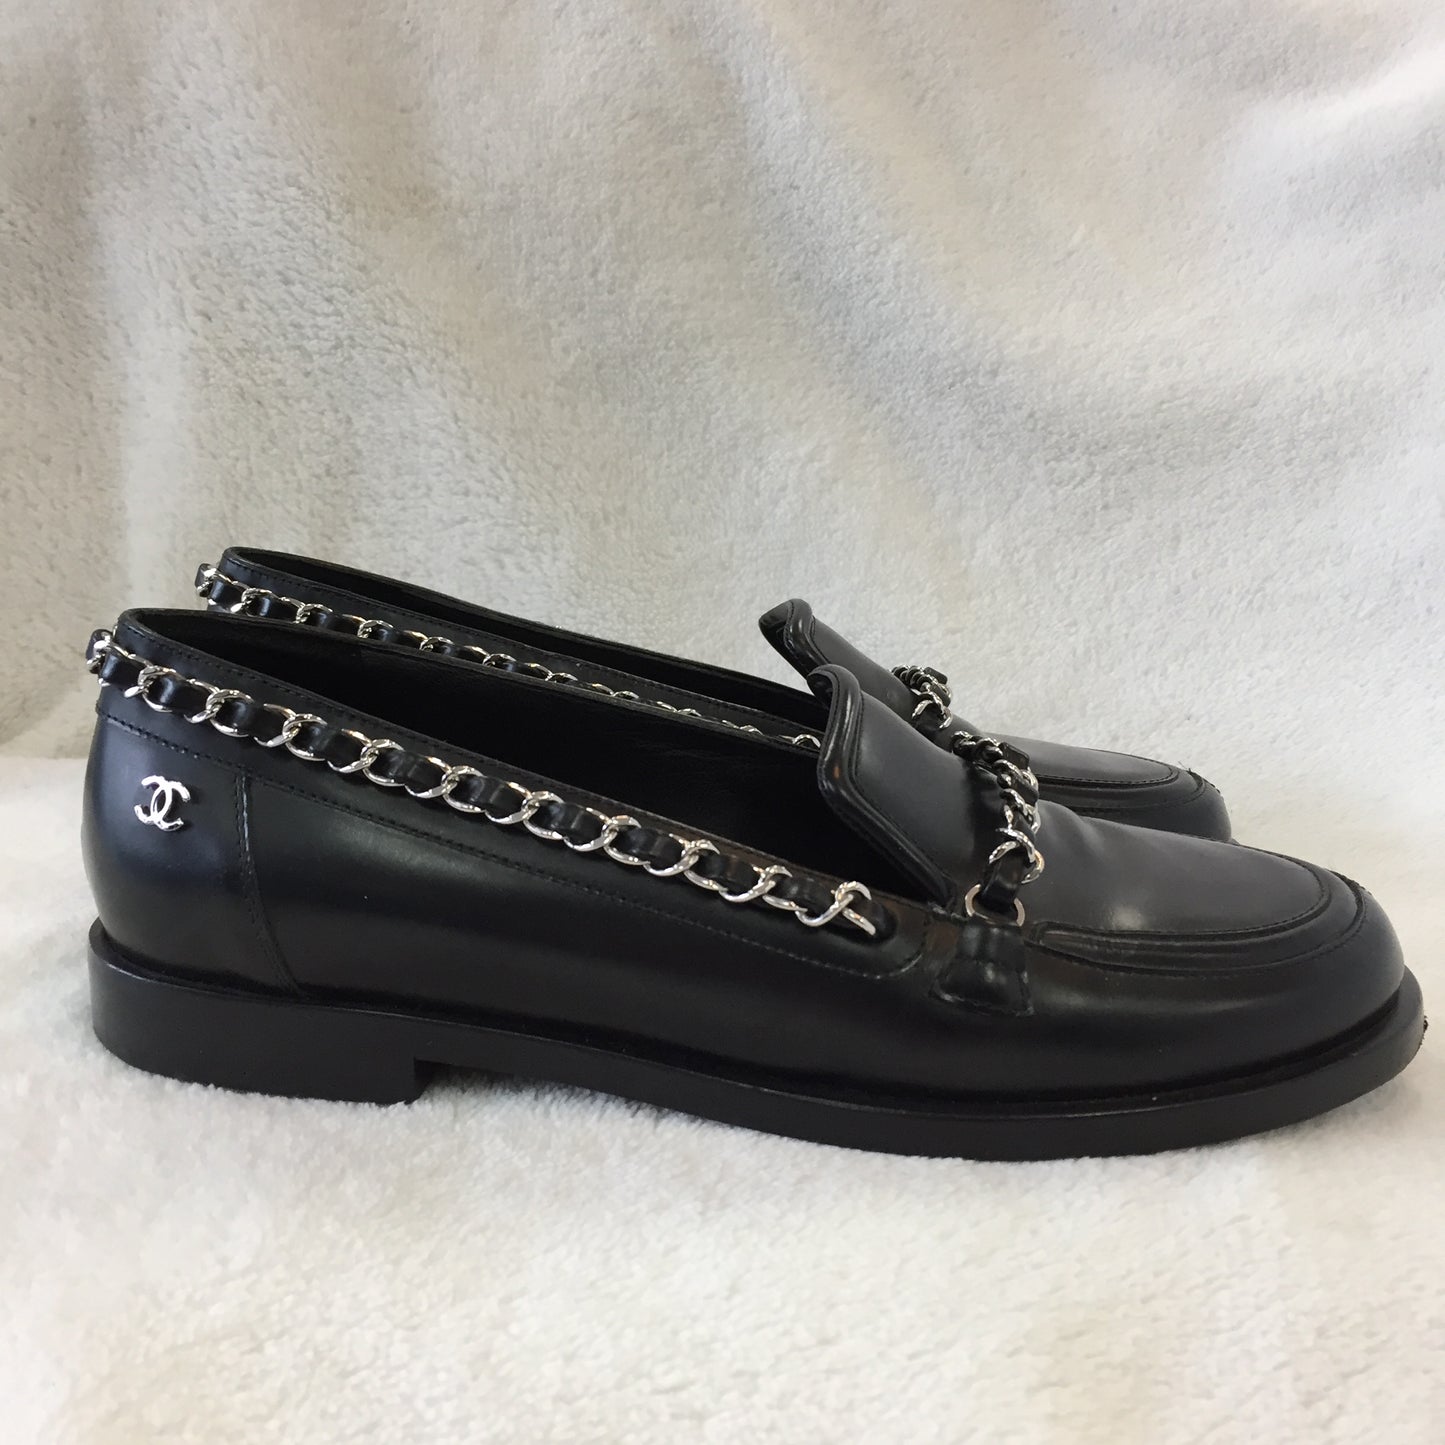 Authentic Chanel Black Chain Loafers Women's Size 35.5 / 5-5.5